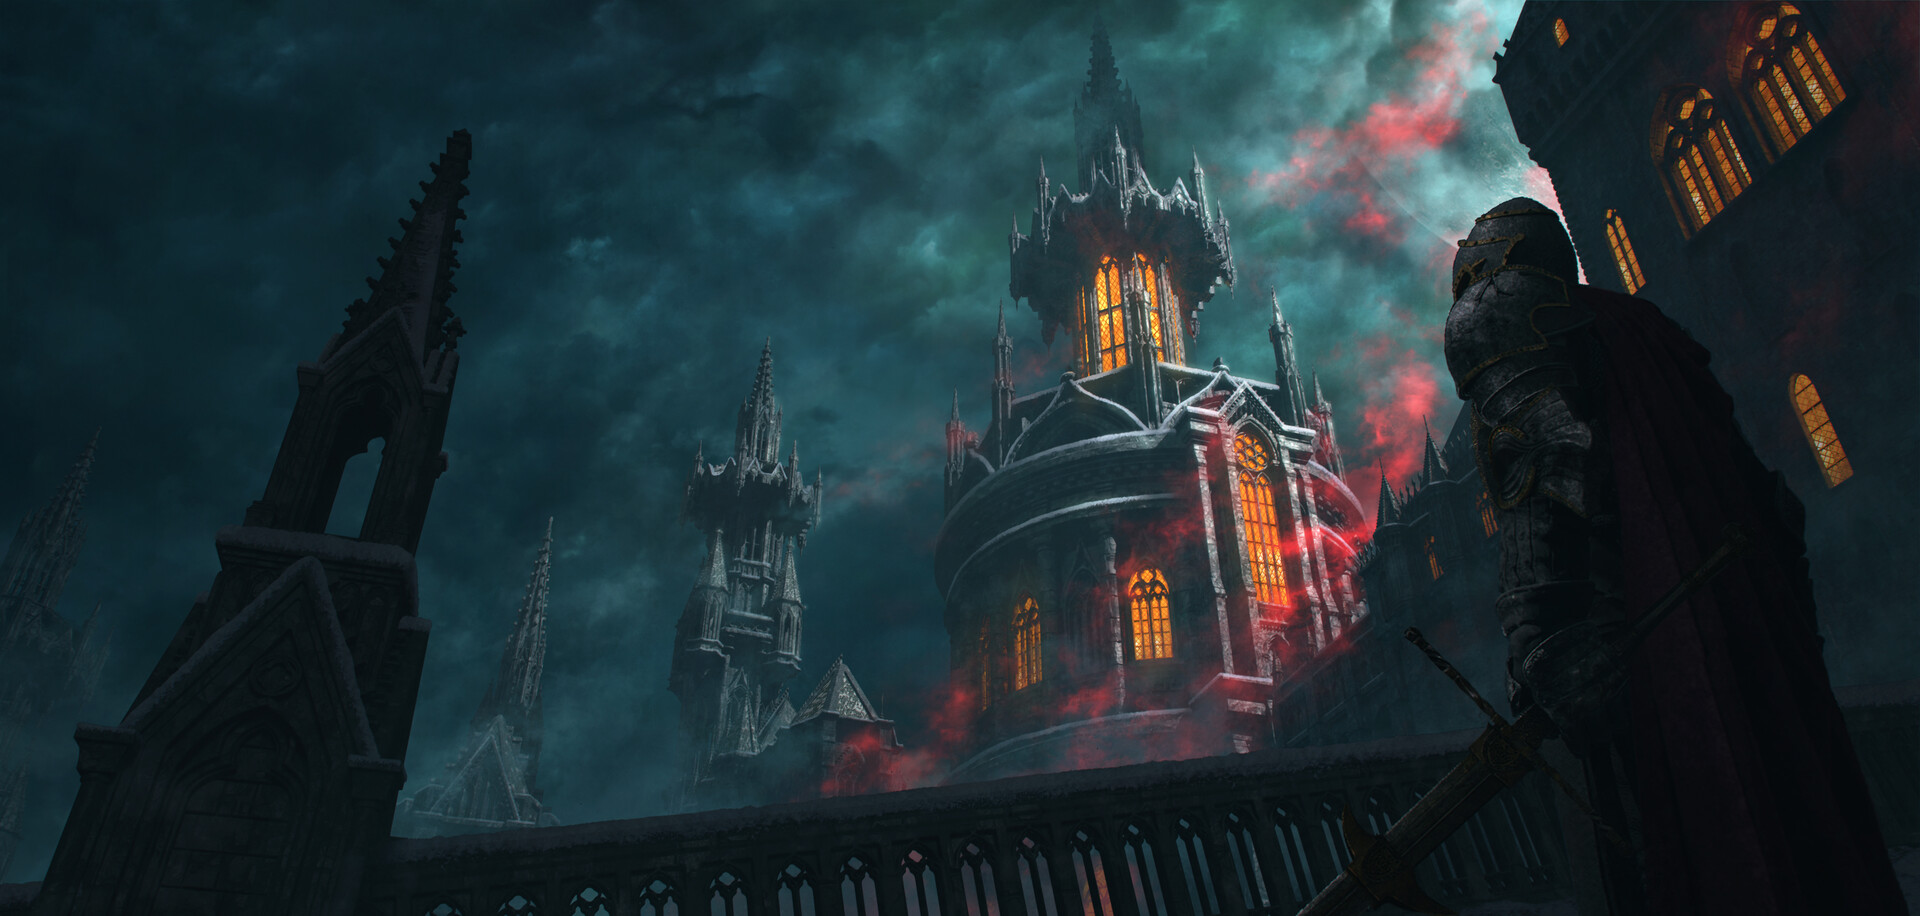 ArtStation - Castlevania: Lords of Shadow - The Castle